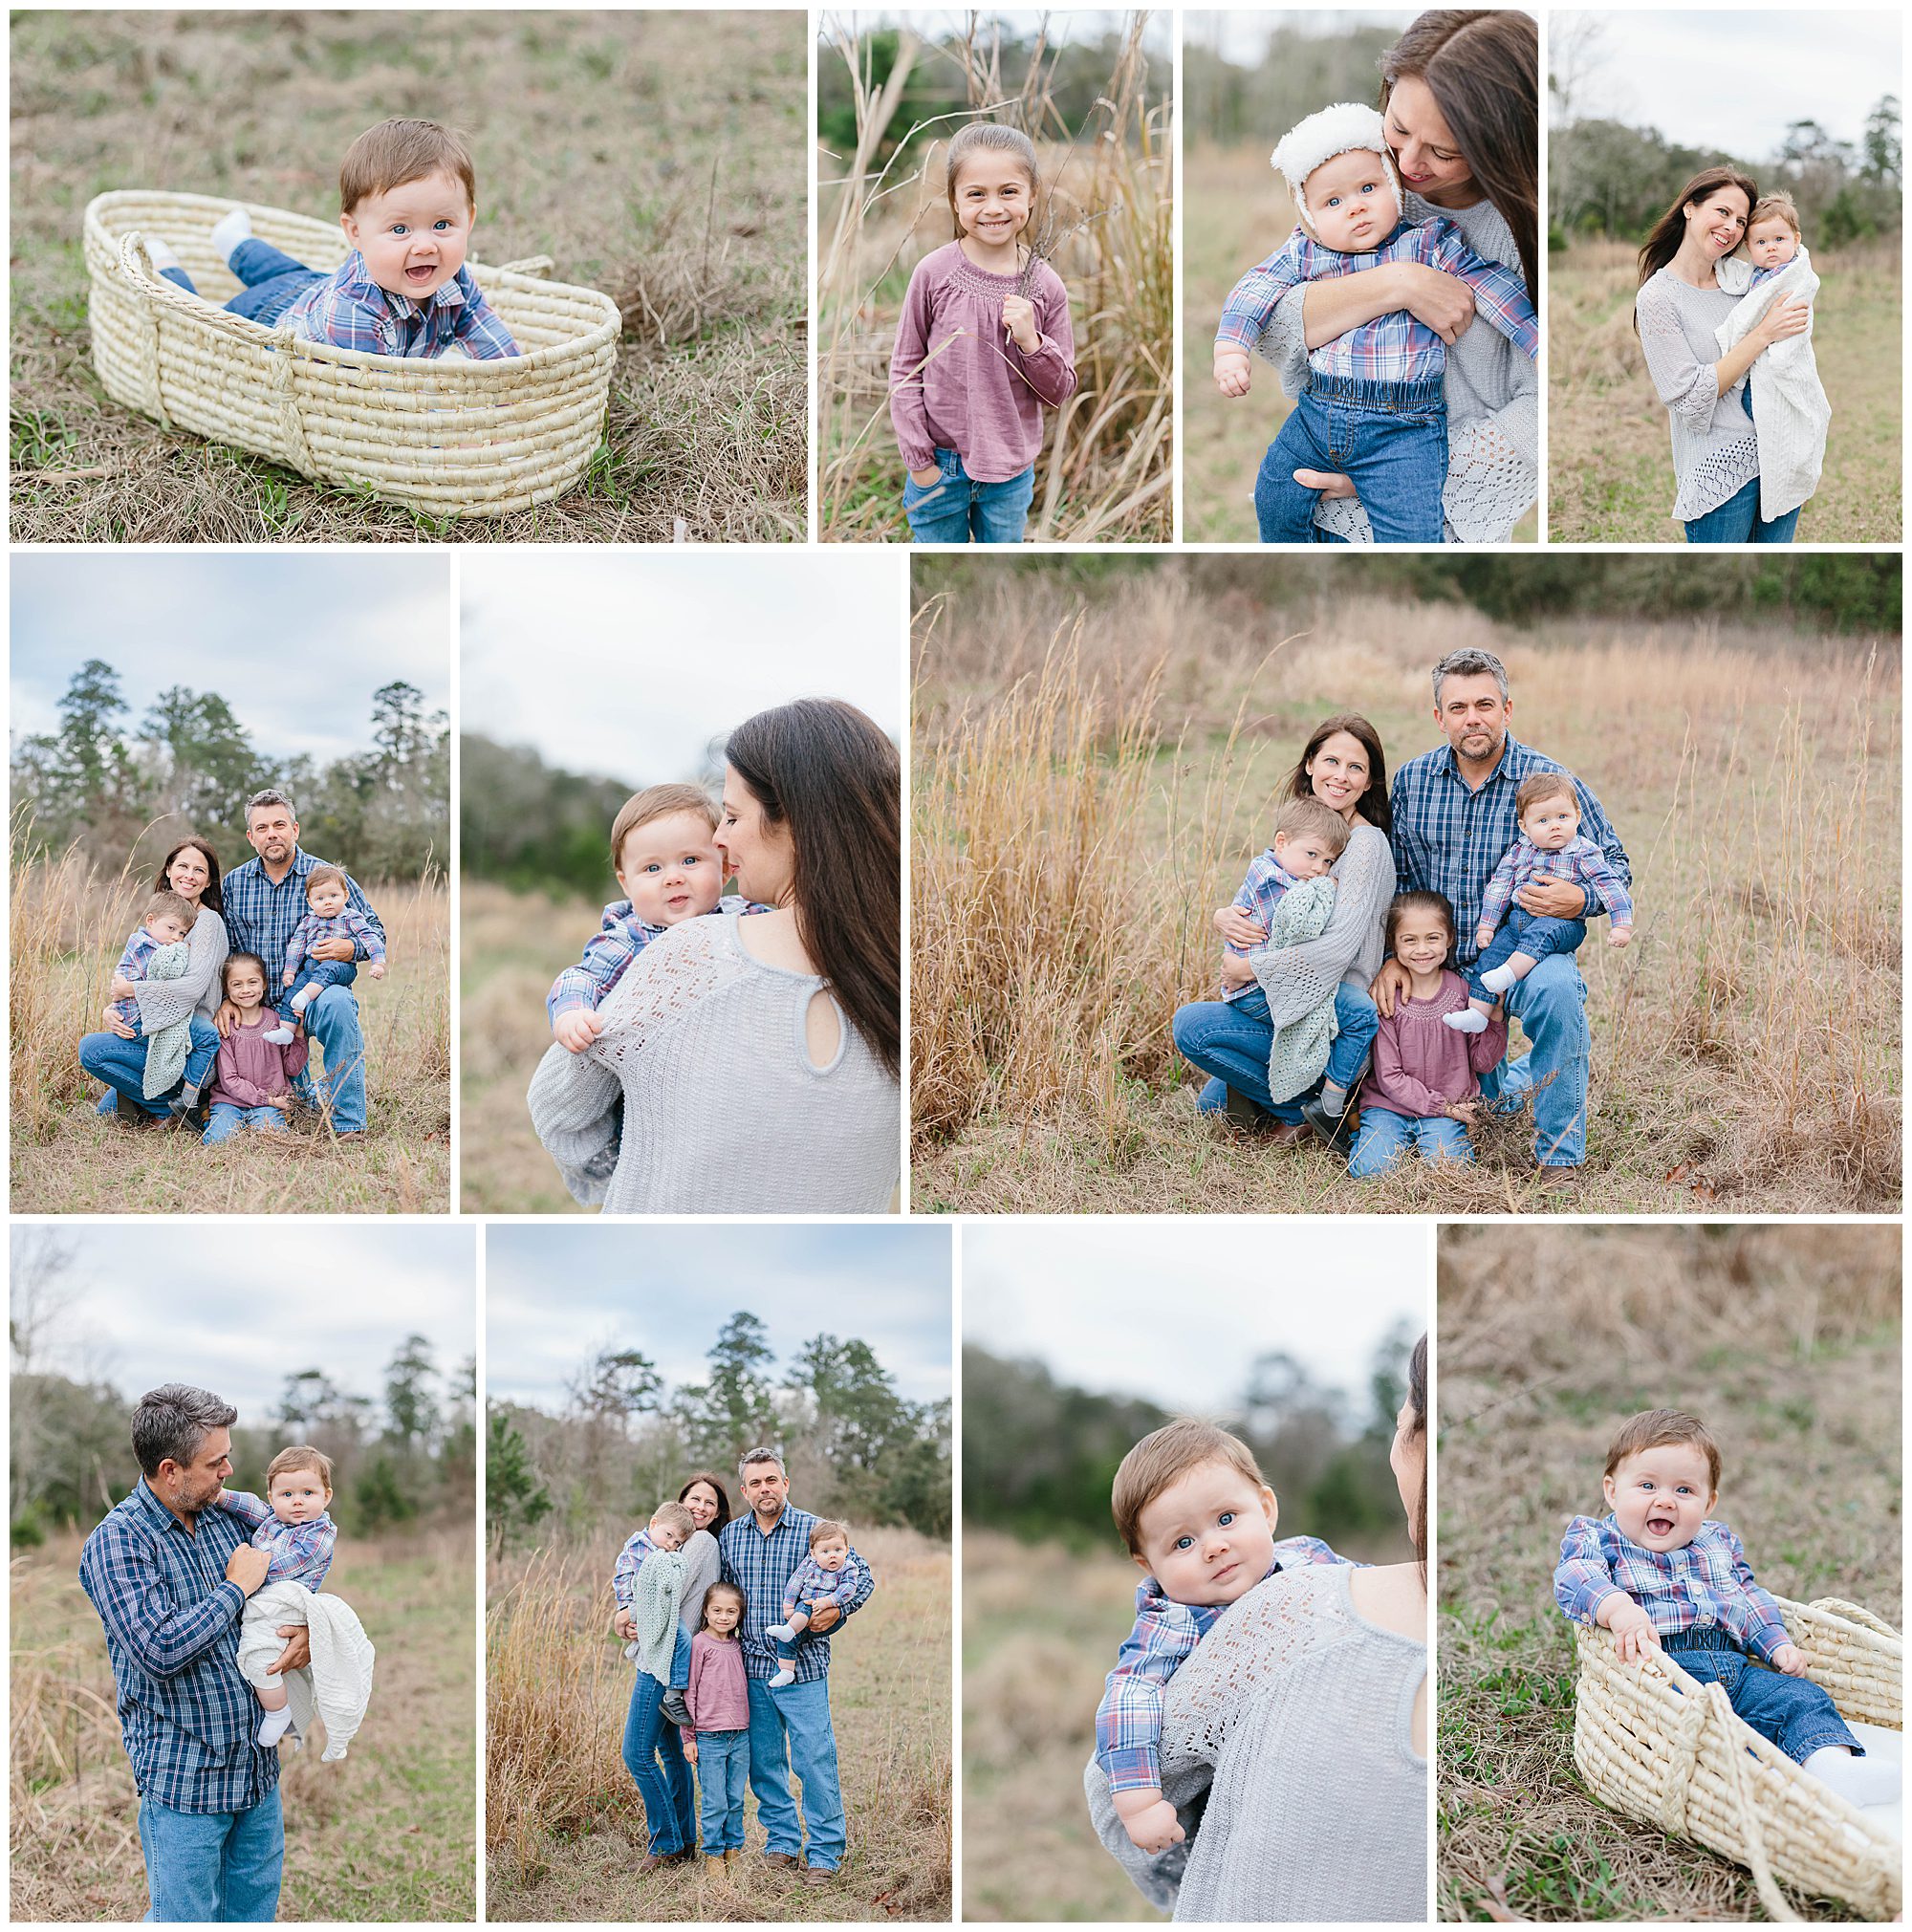 Collage of baby with family members in a field